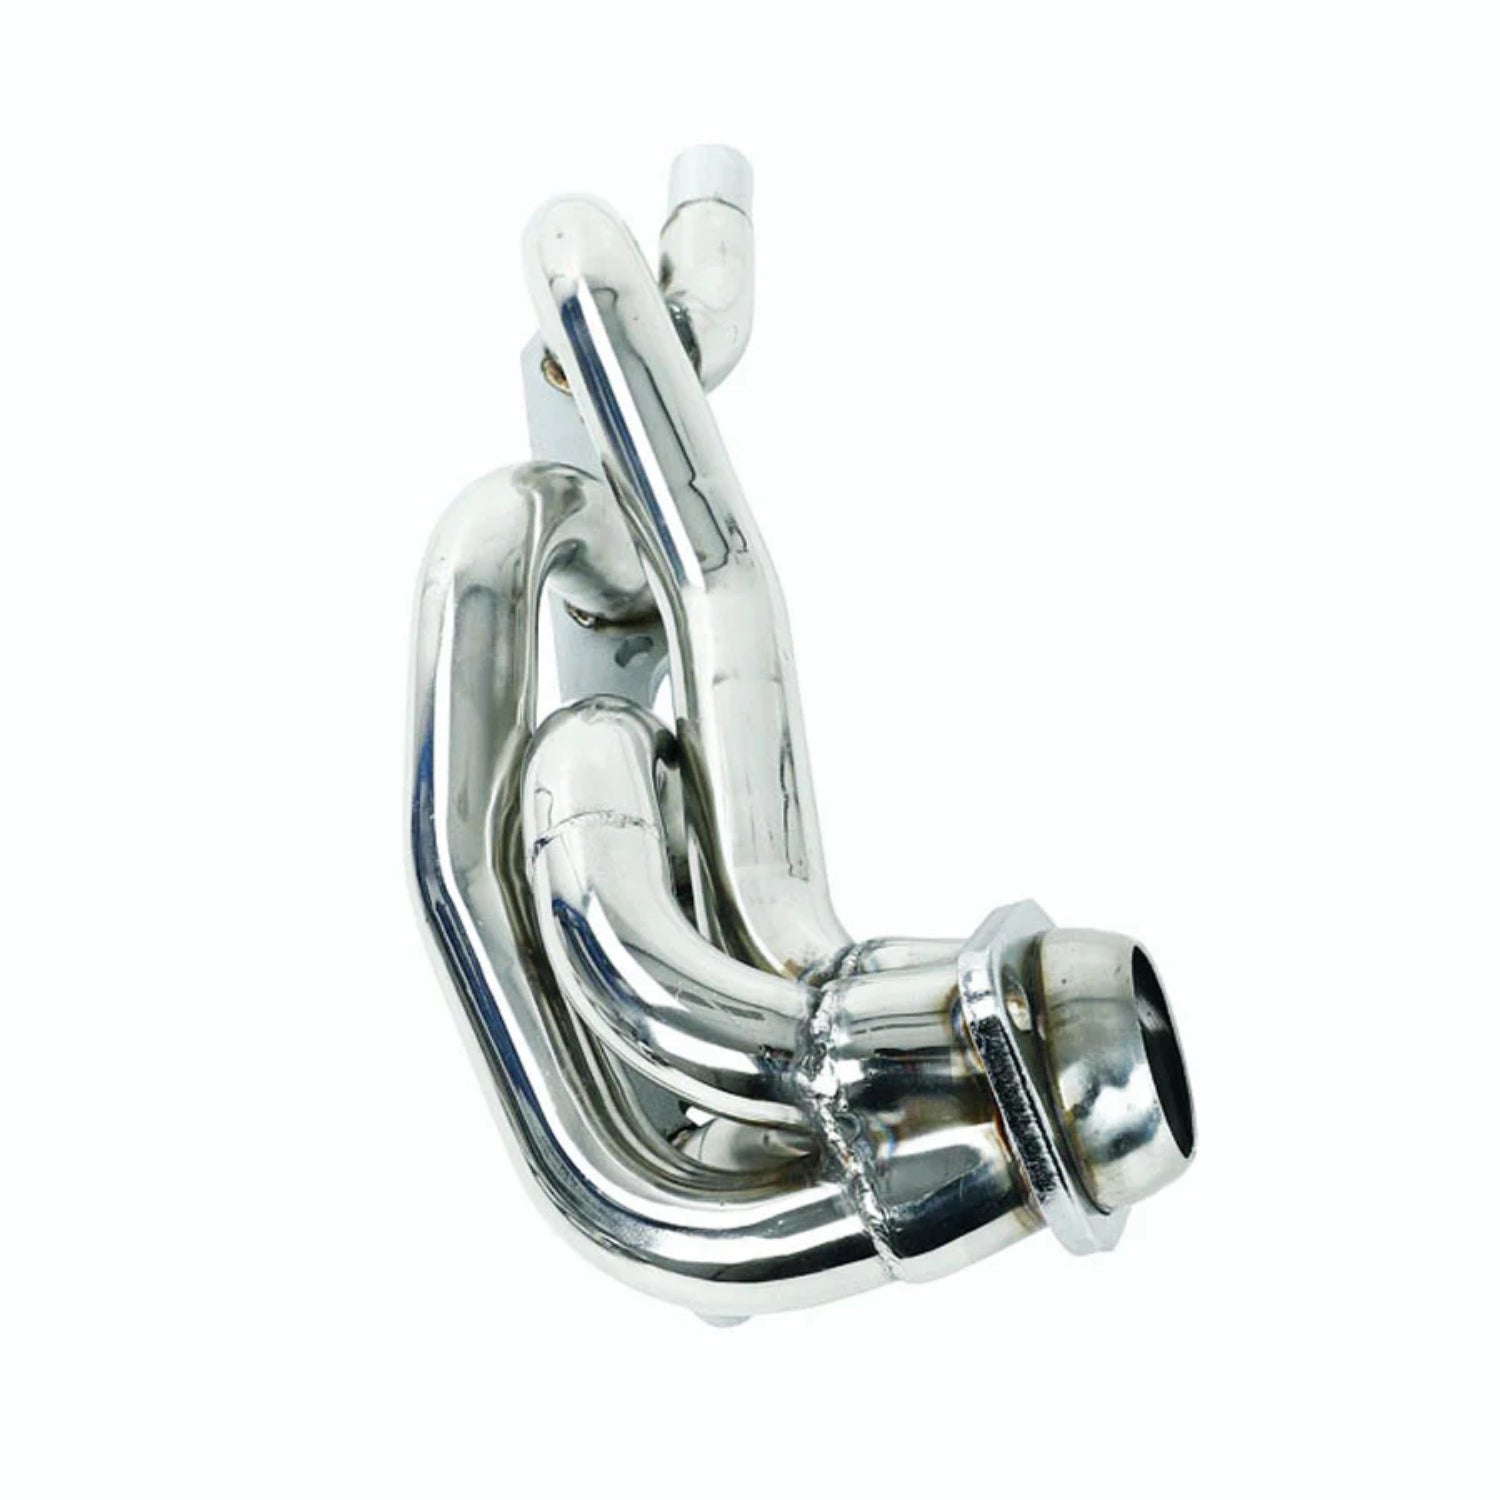 Stainless Steel Exhaust Header Manifold for Ford F150 F250 Bronco 1987-1996 5.8L V8